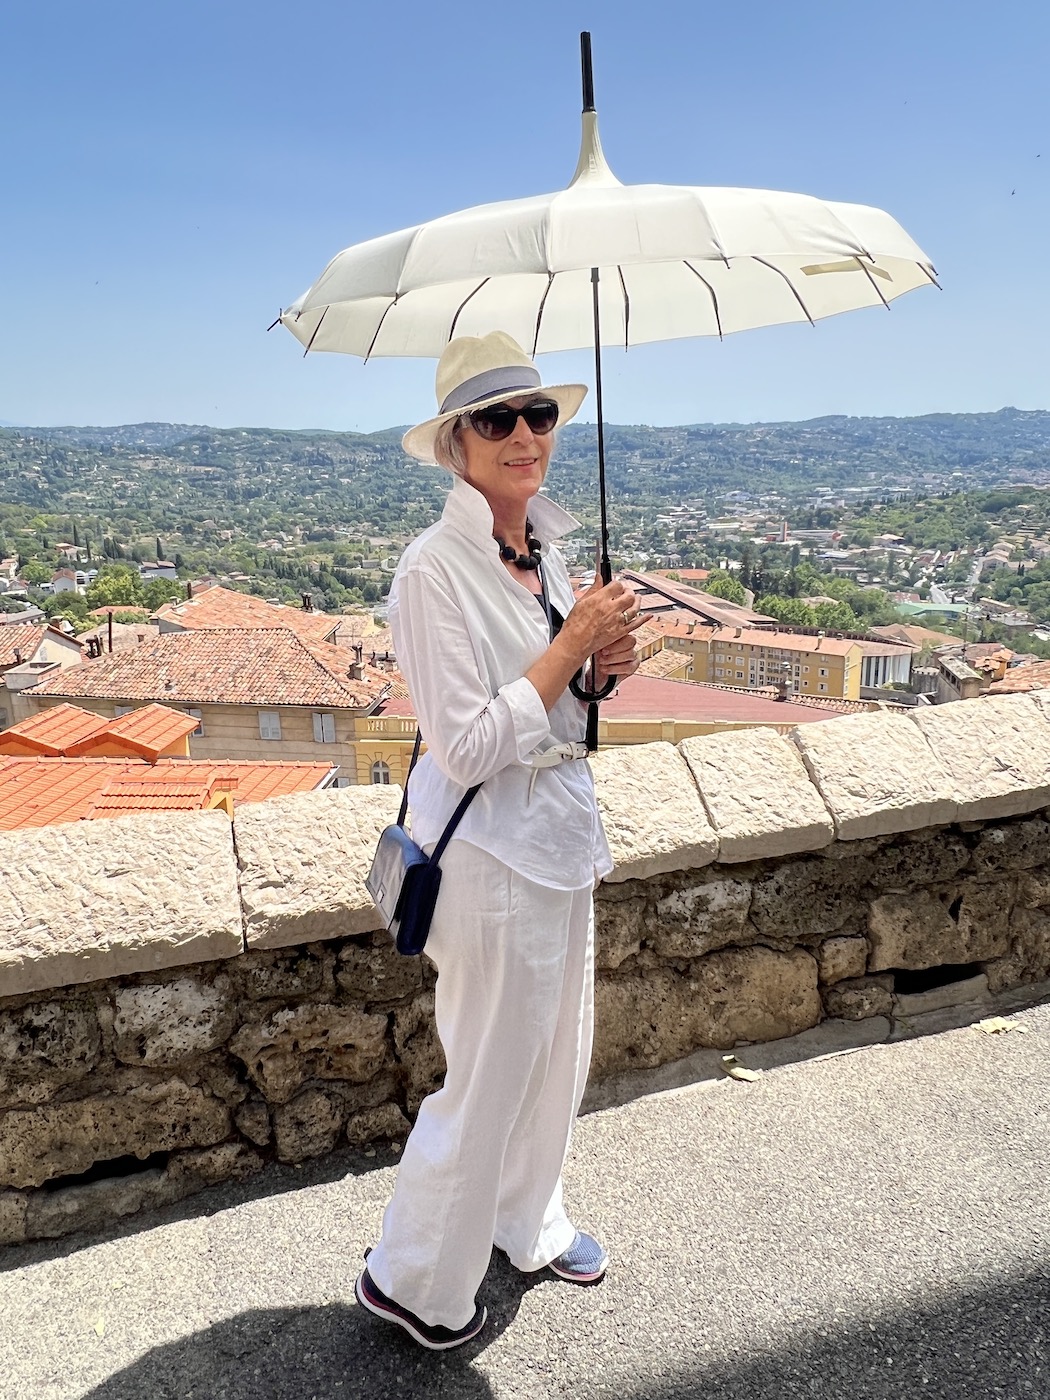 Linen outfit and parasol in Grasse